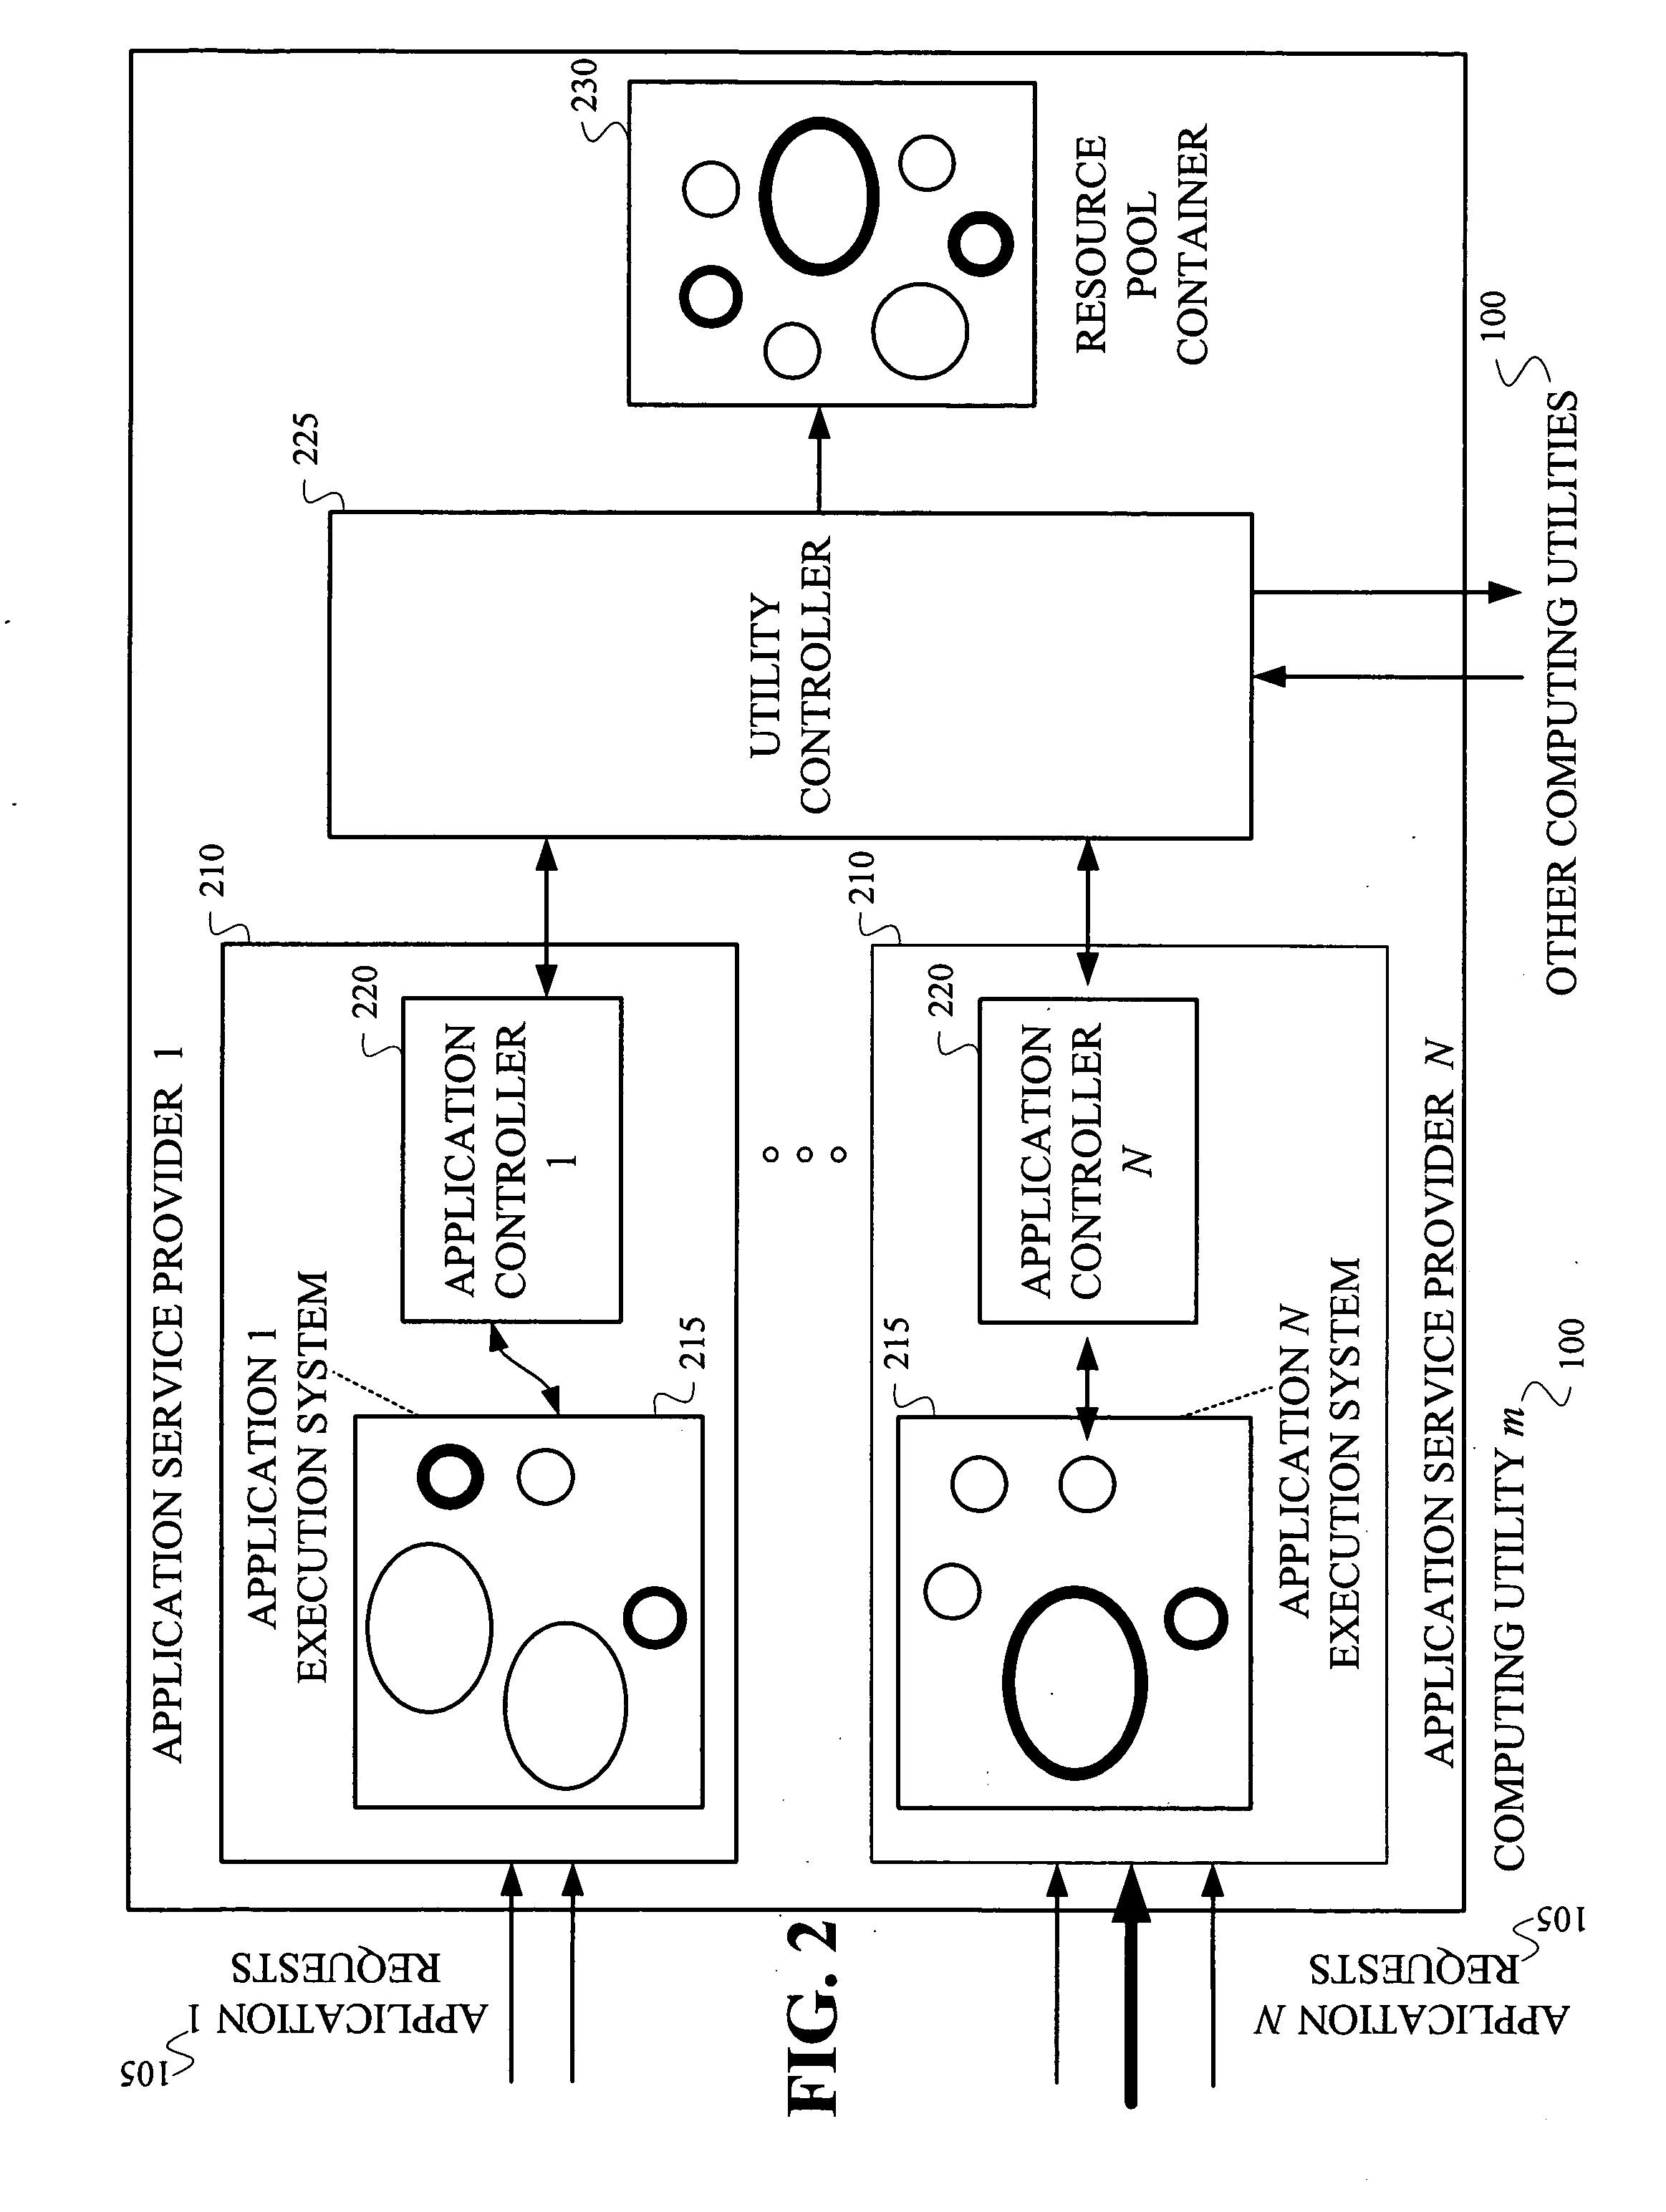 Systems and methods for business-level resource optimizations in computing utilities